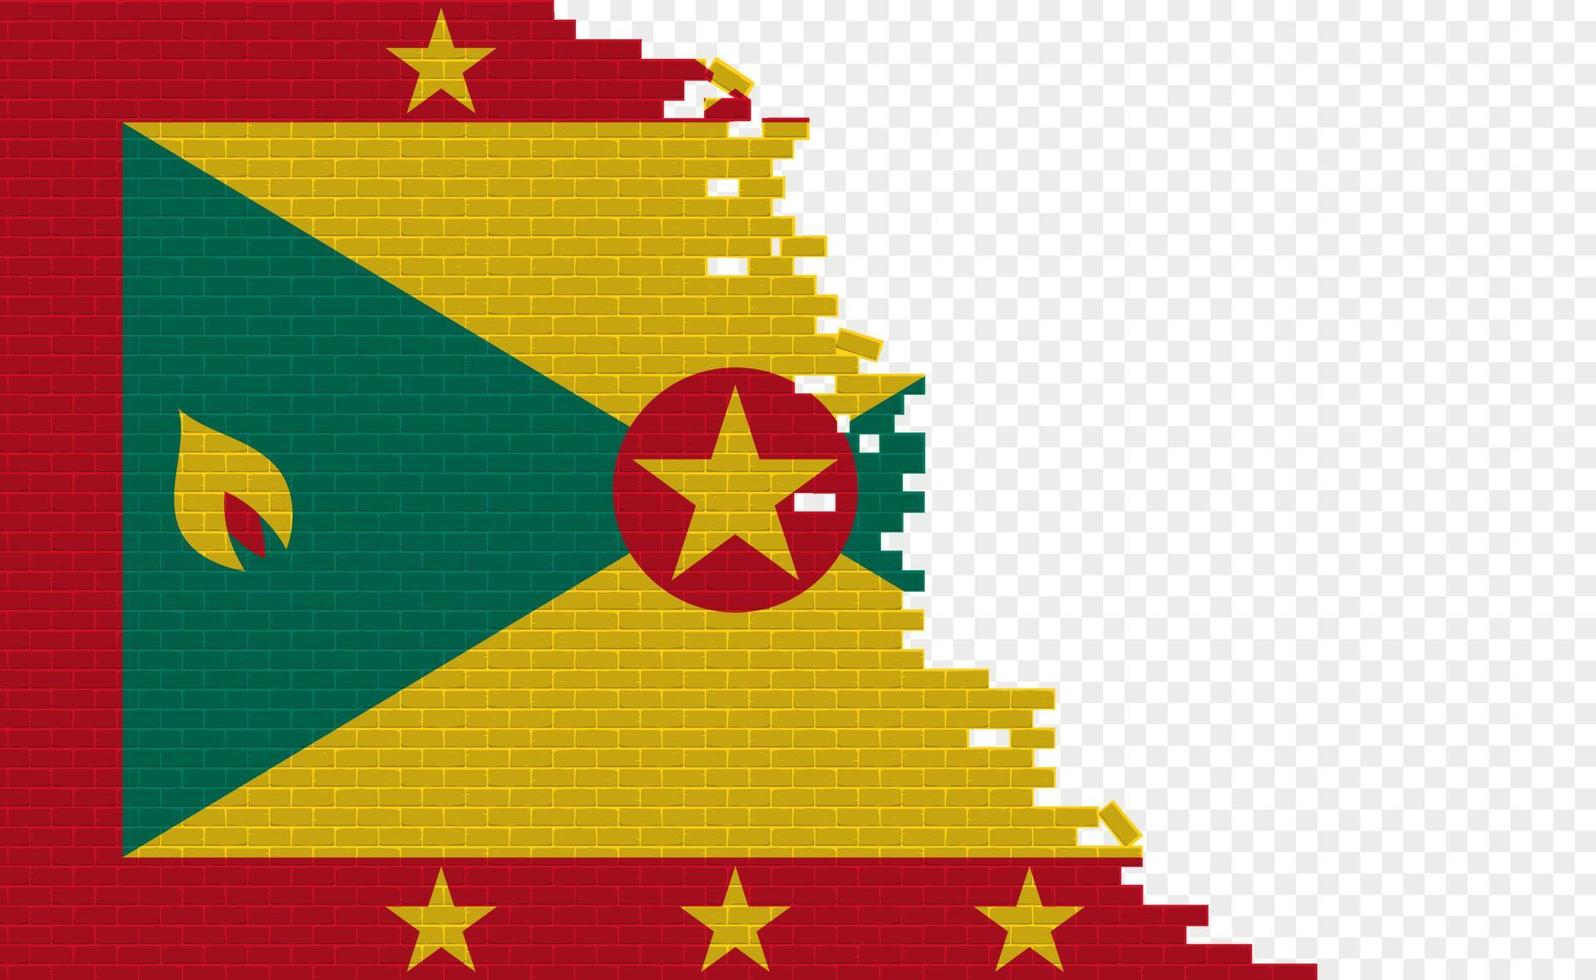 Grenada flag on broken brick wall. Empty flag field of another country. Country comparison. Easy editing and vector in groups.